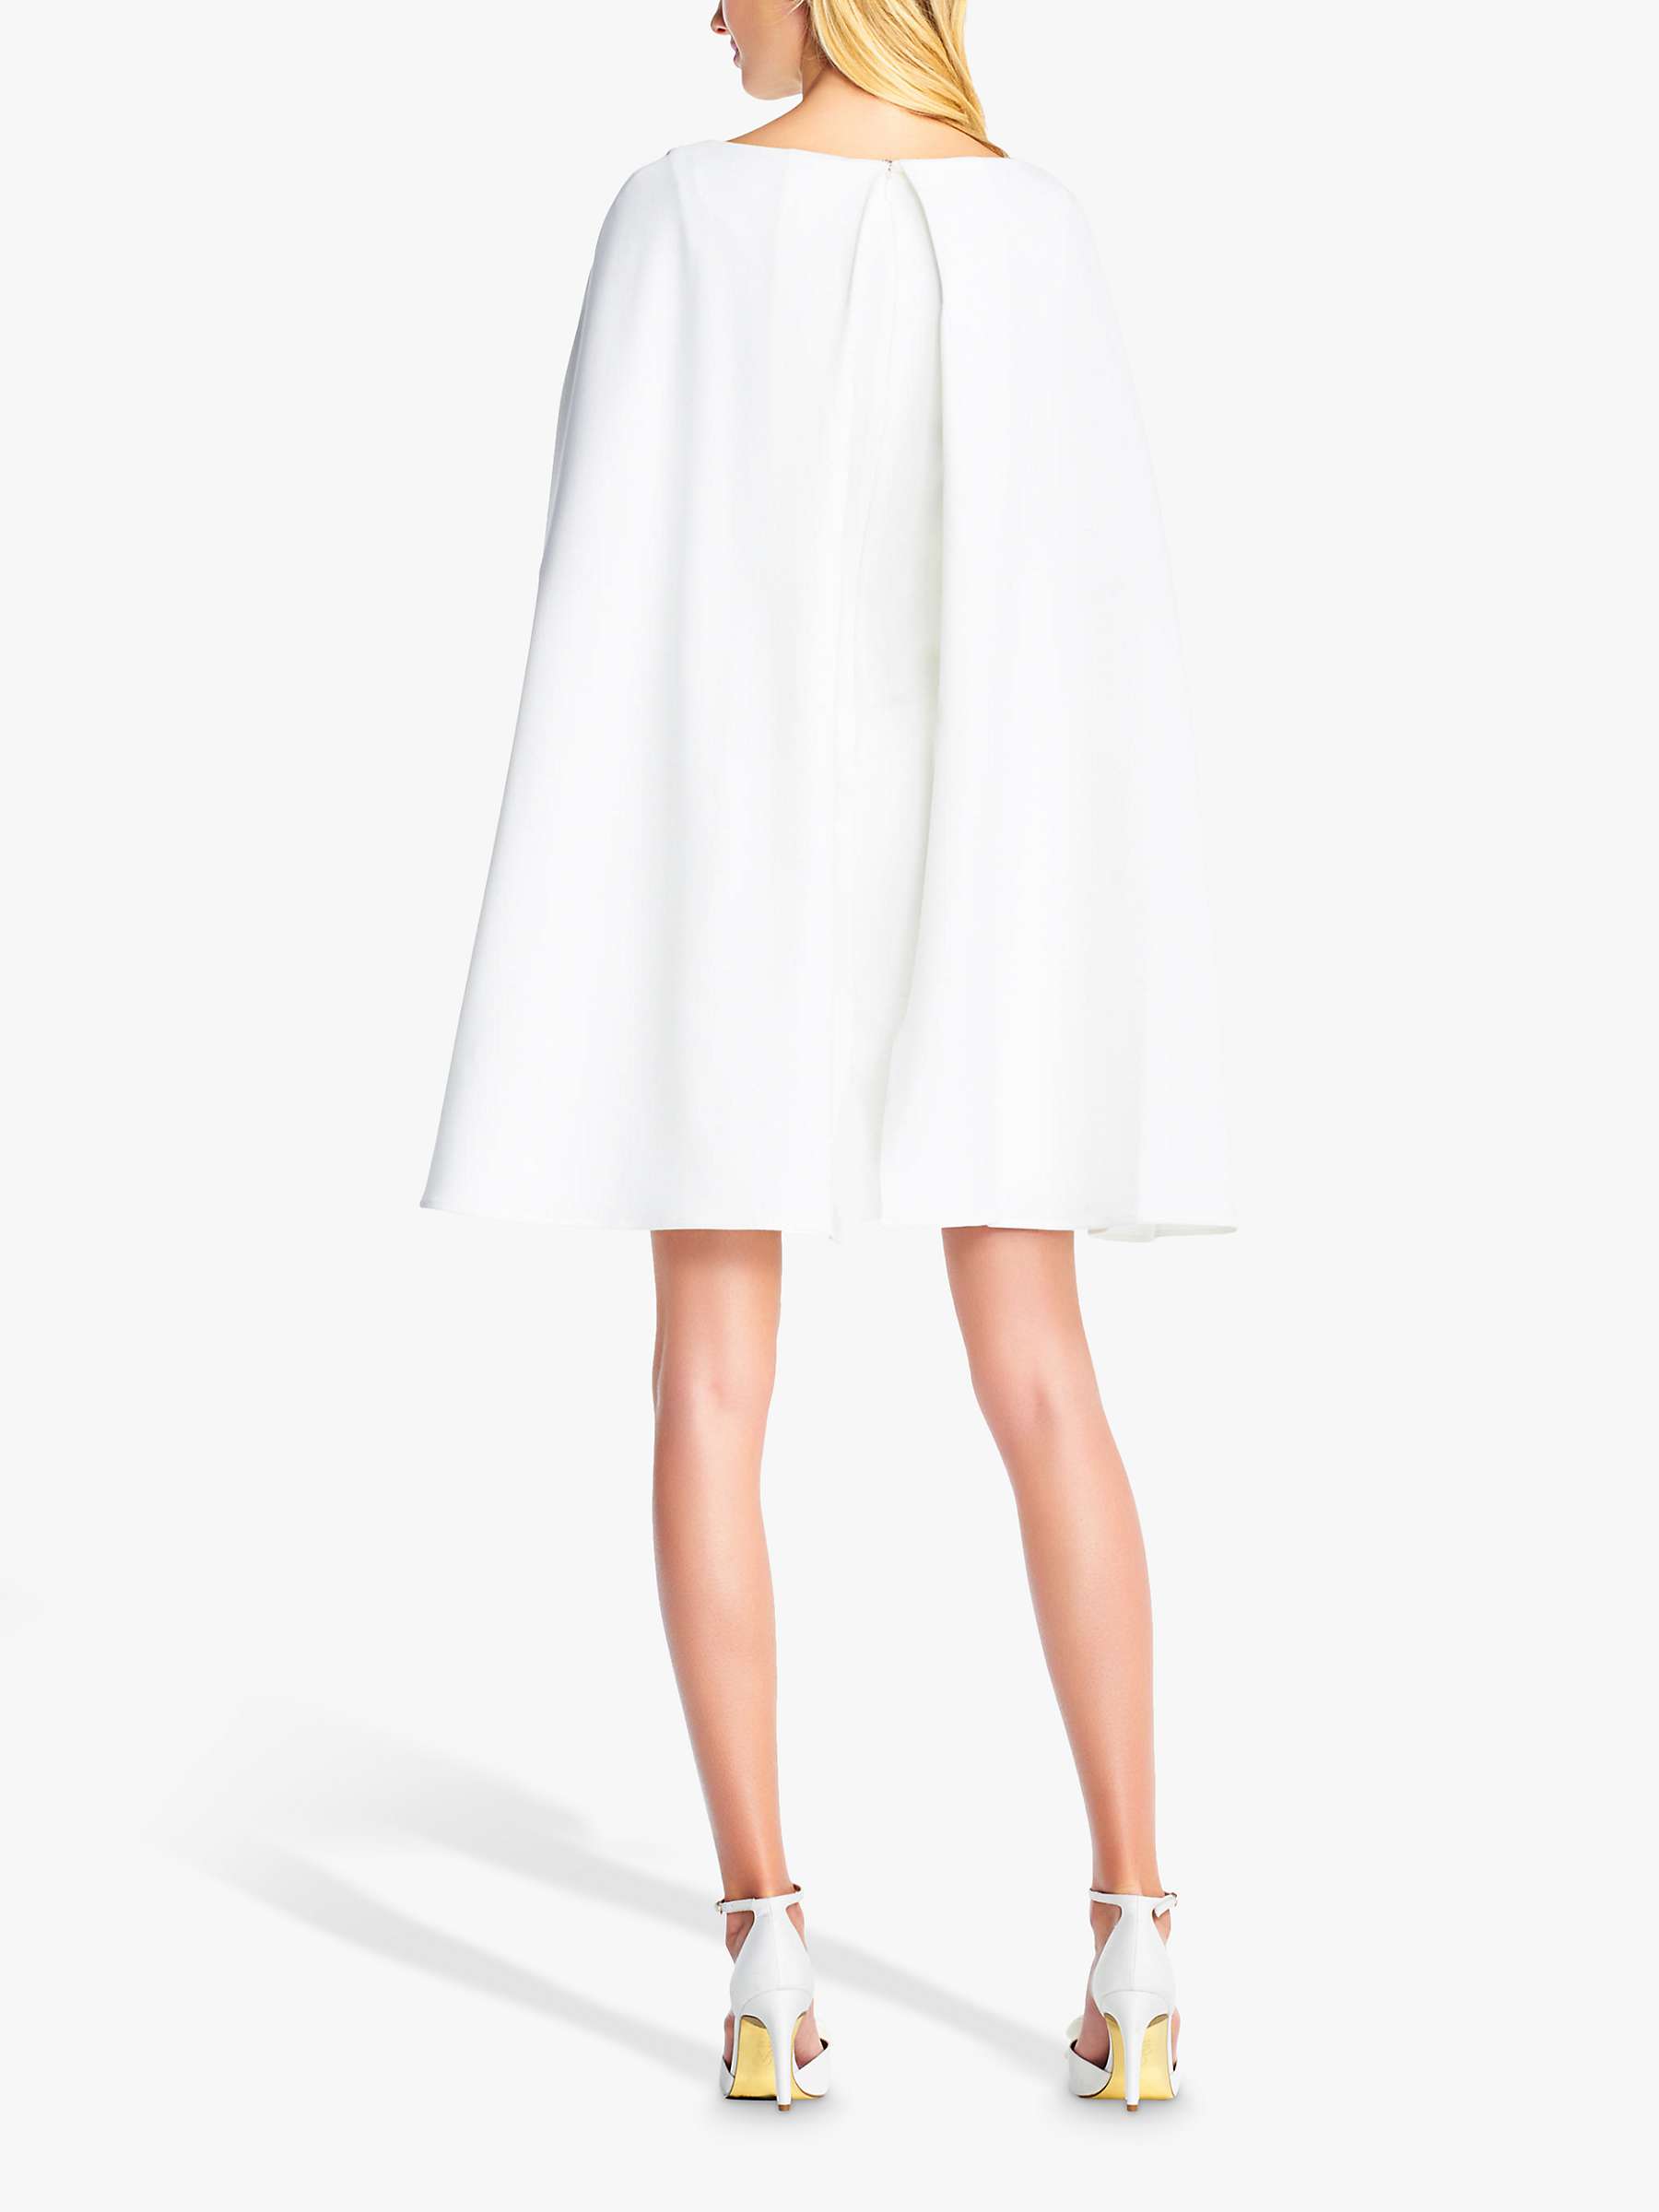 Buy Adrianna Papell Cape Cocktail Dress Online at johnlewis.com